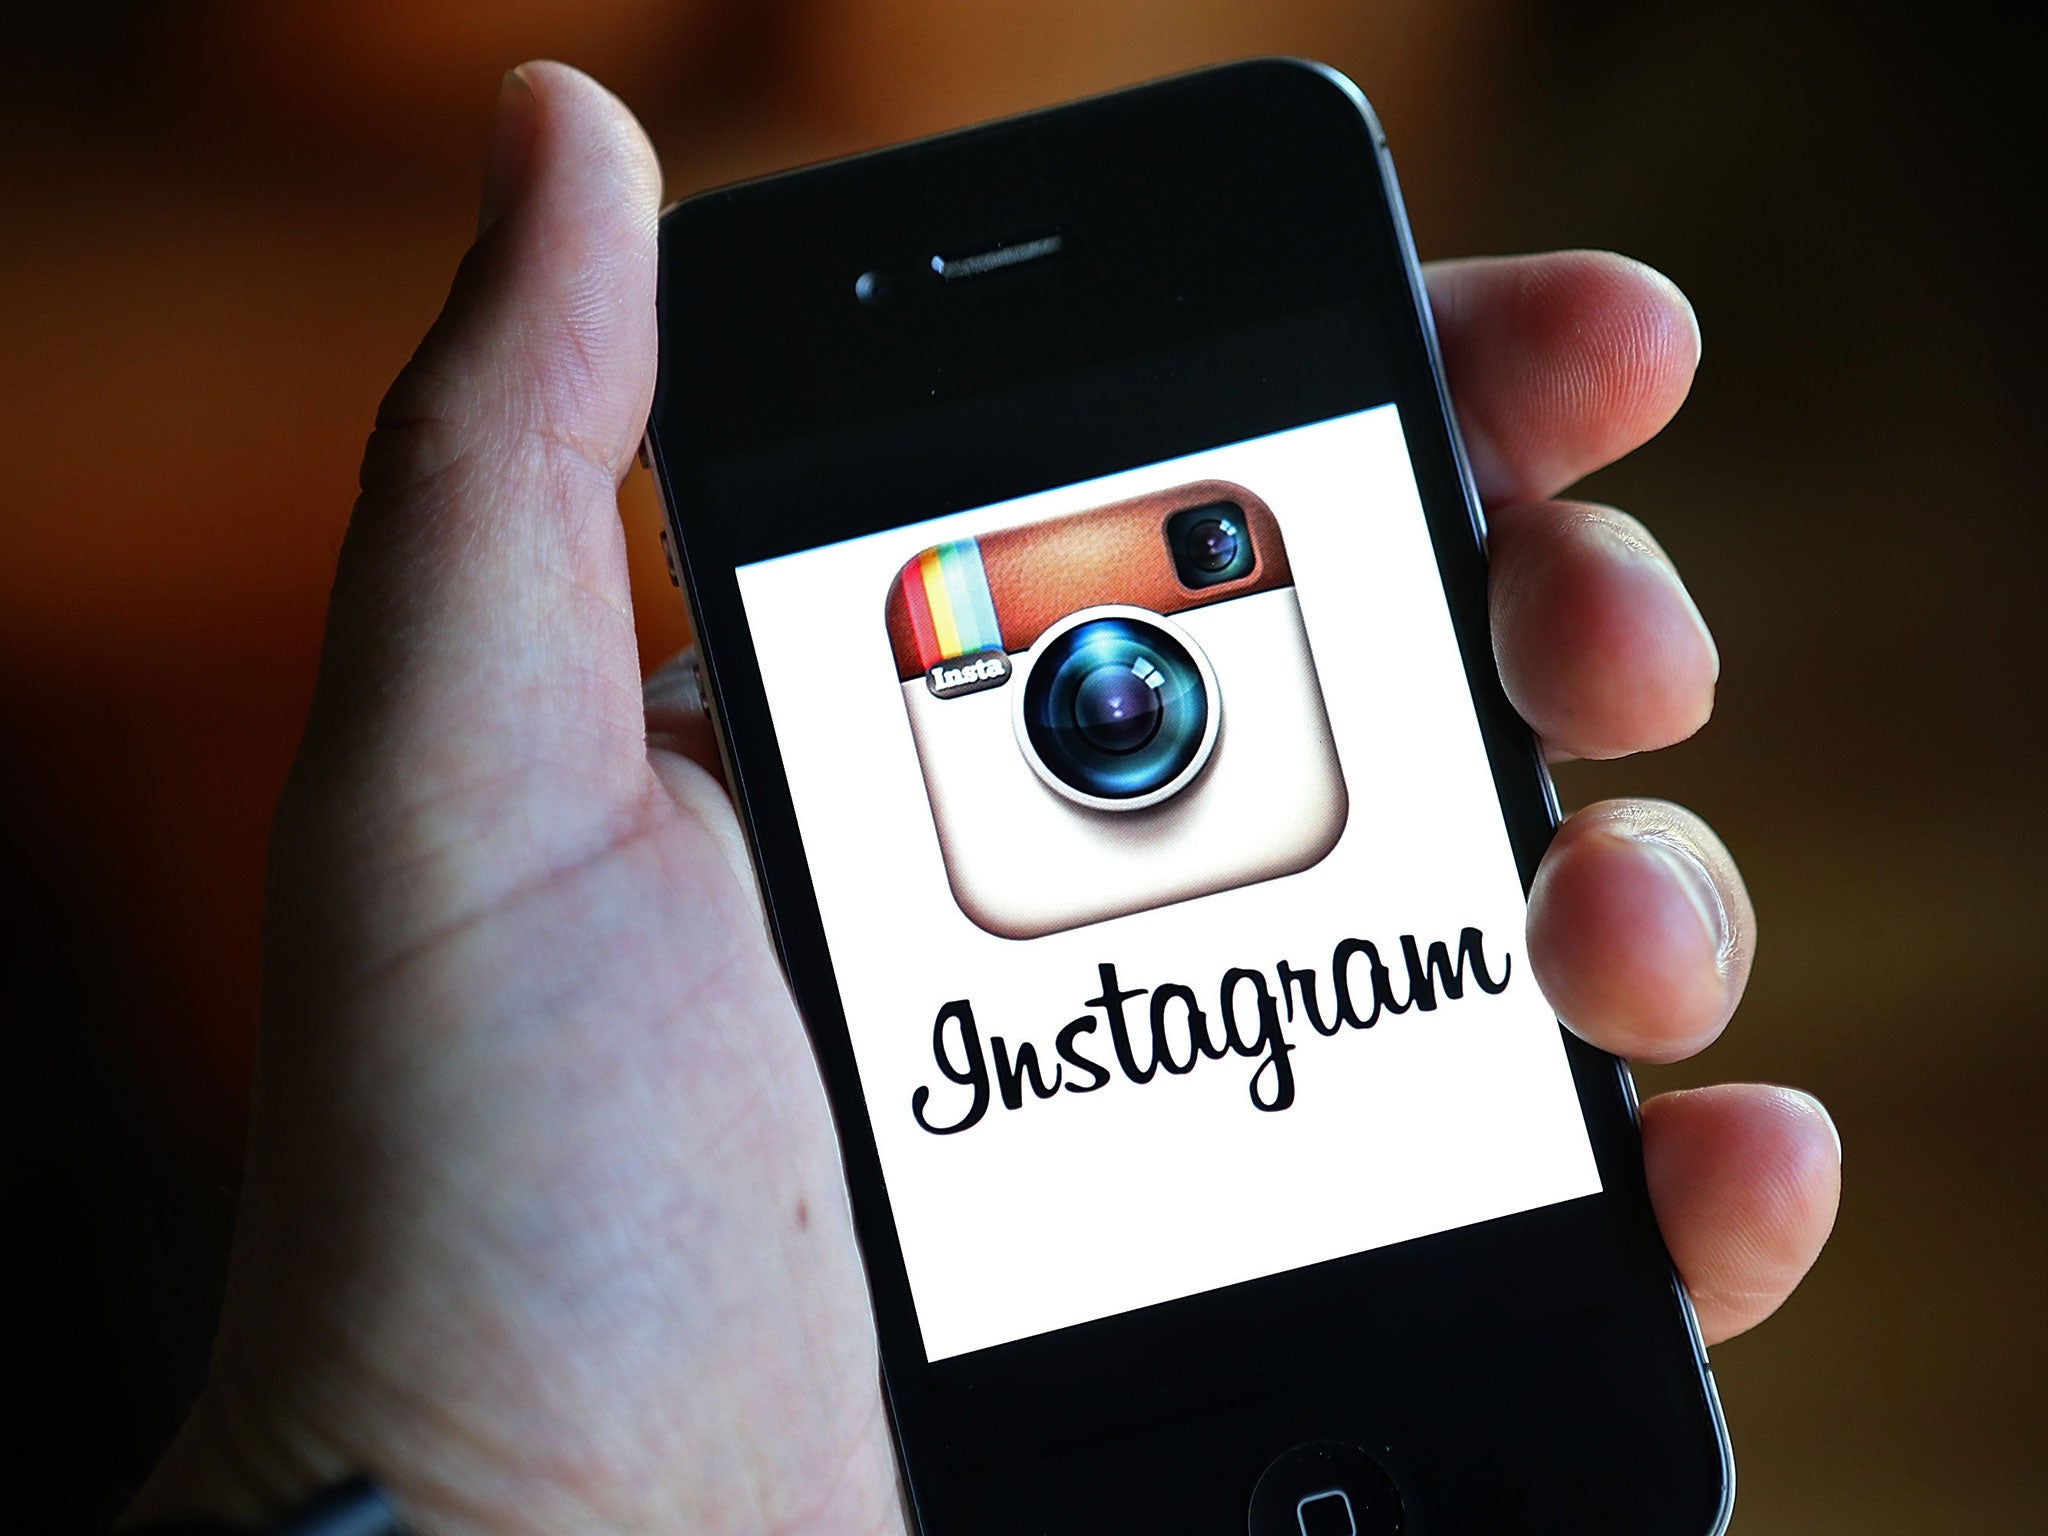 Instagram is sending users 'highlights' from their friends